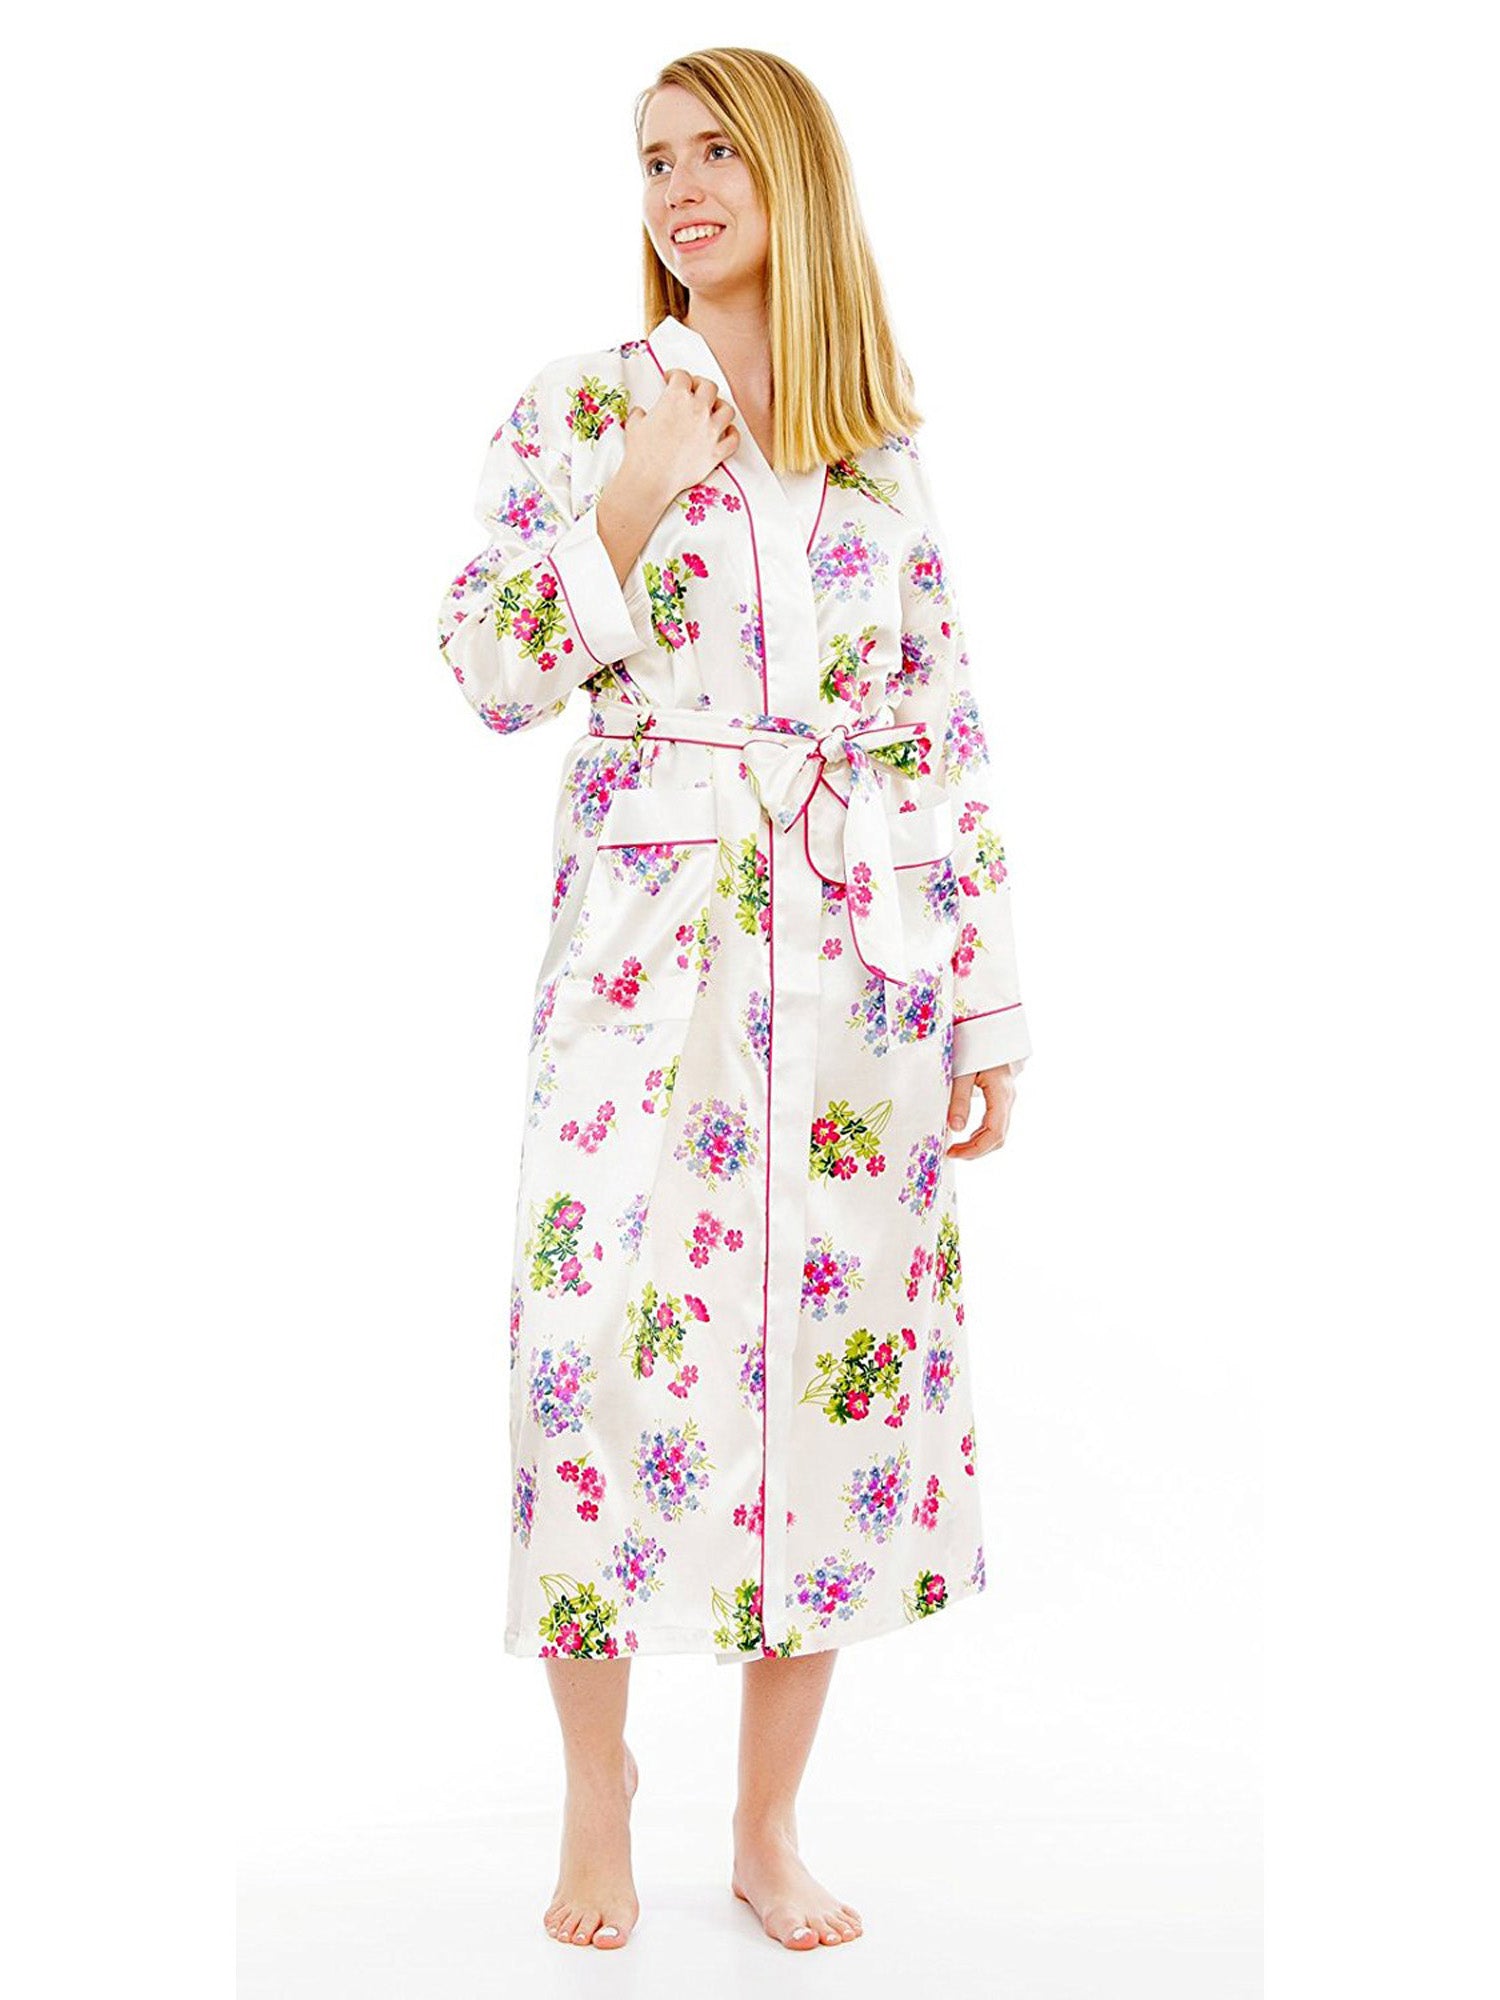 Women's Long Robe, Satin, Ivory Floral Print with Pockets